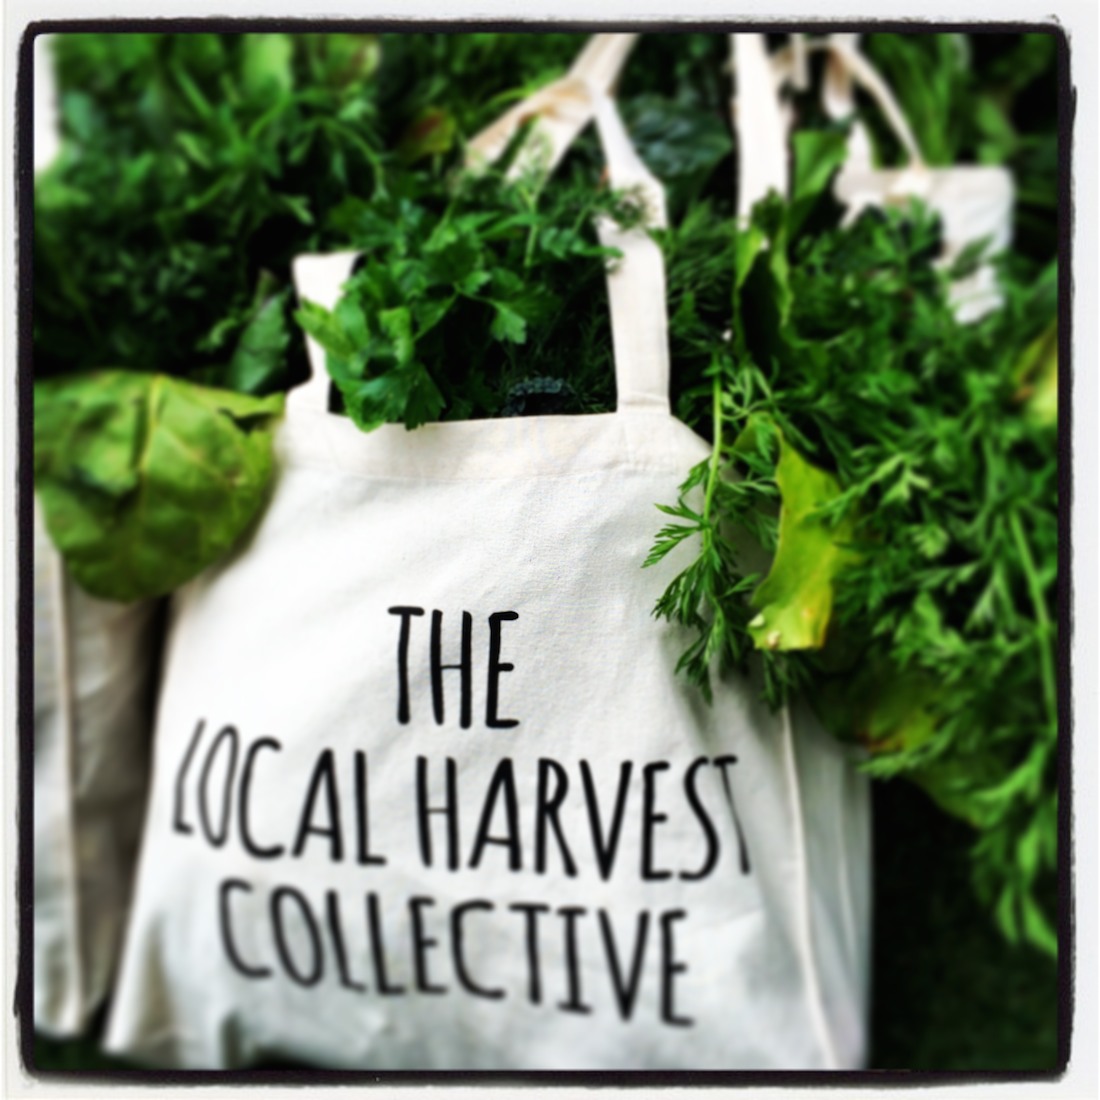 The Local Harvest Collective